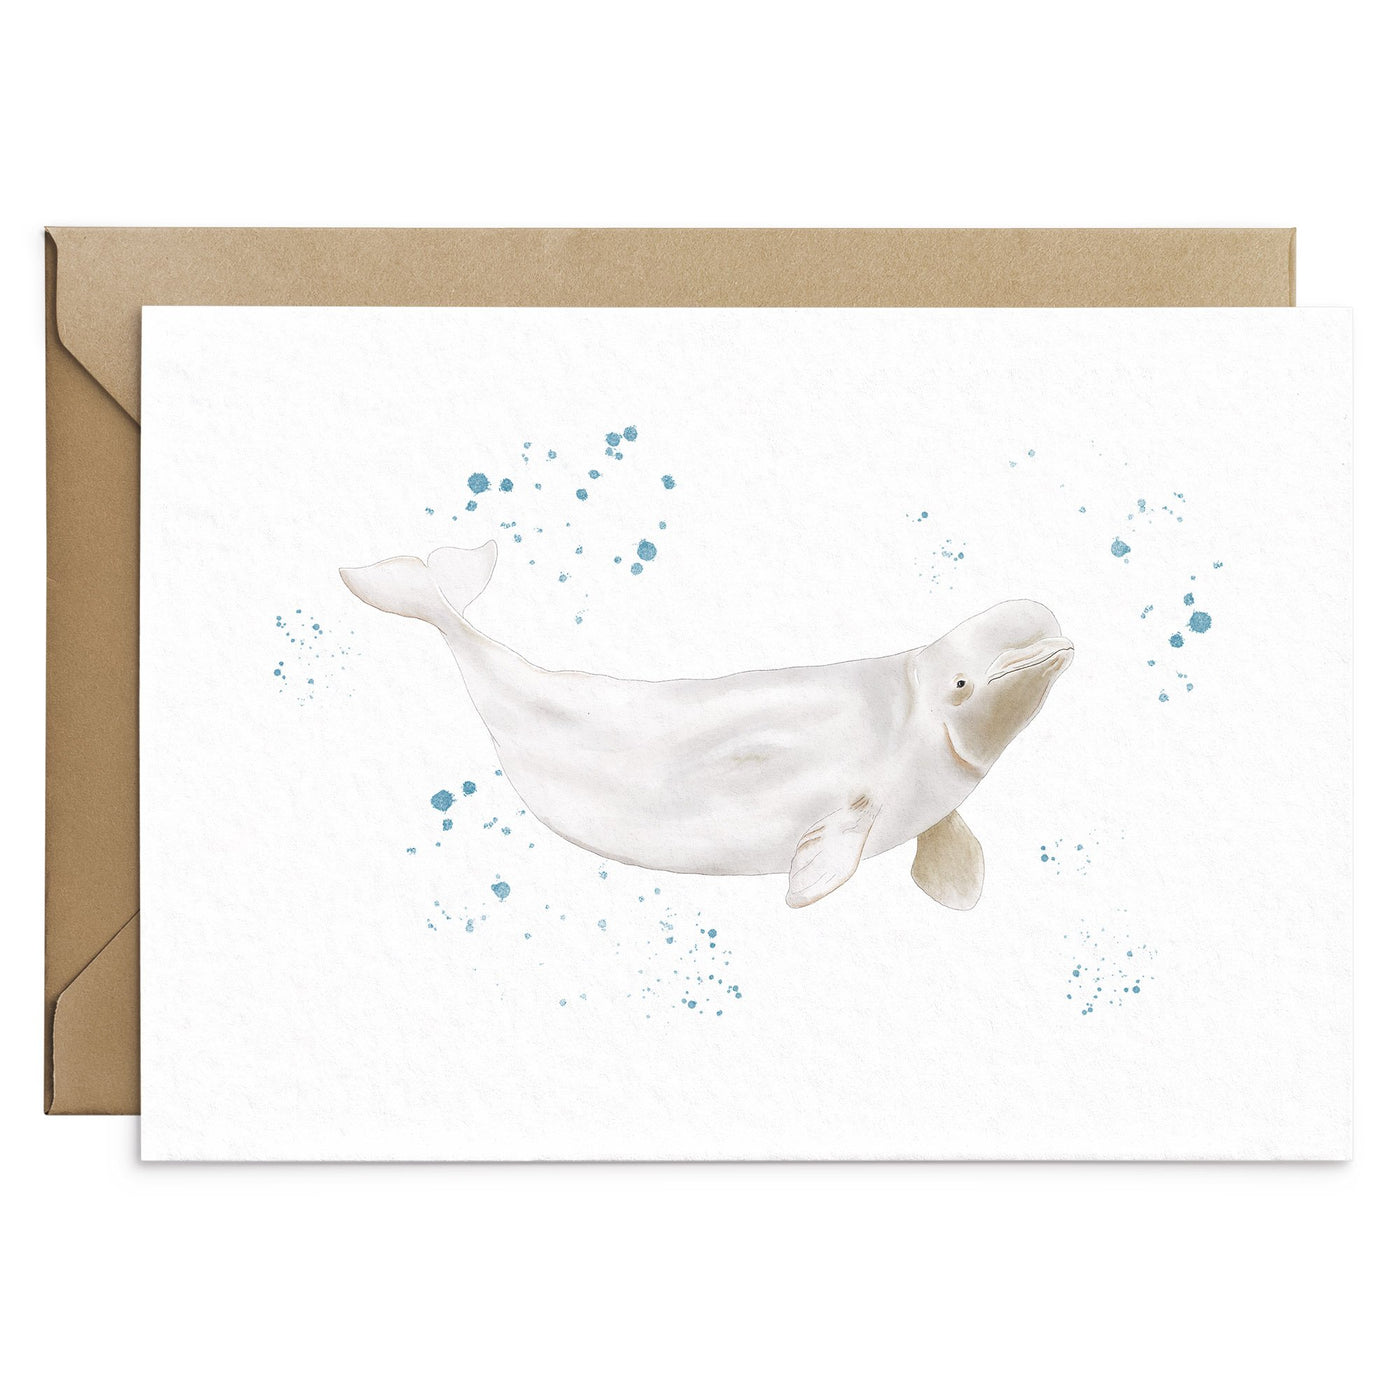 Beluga Whale Greeting Card - Poppins & Co.